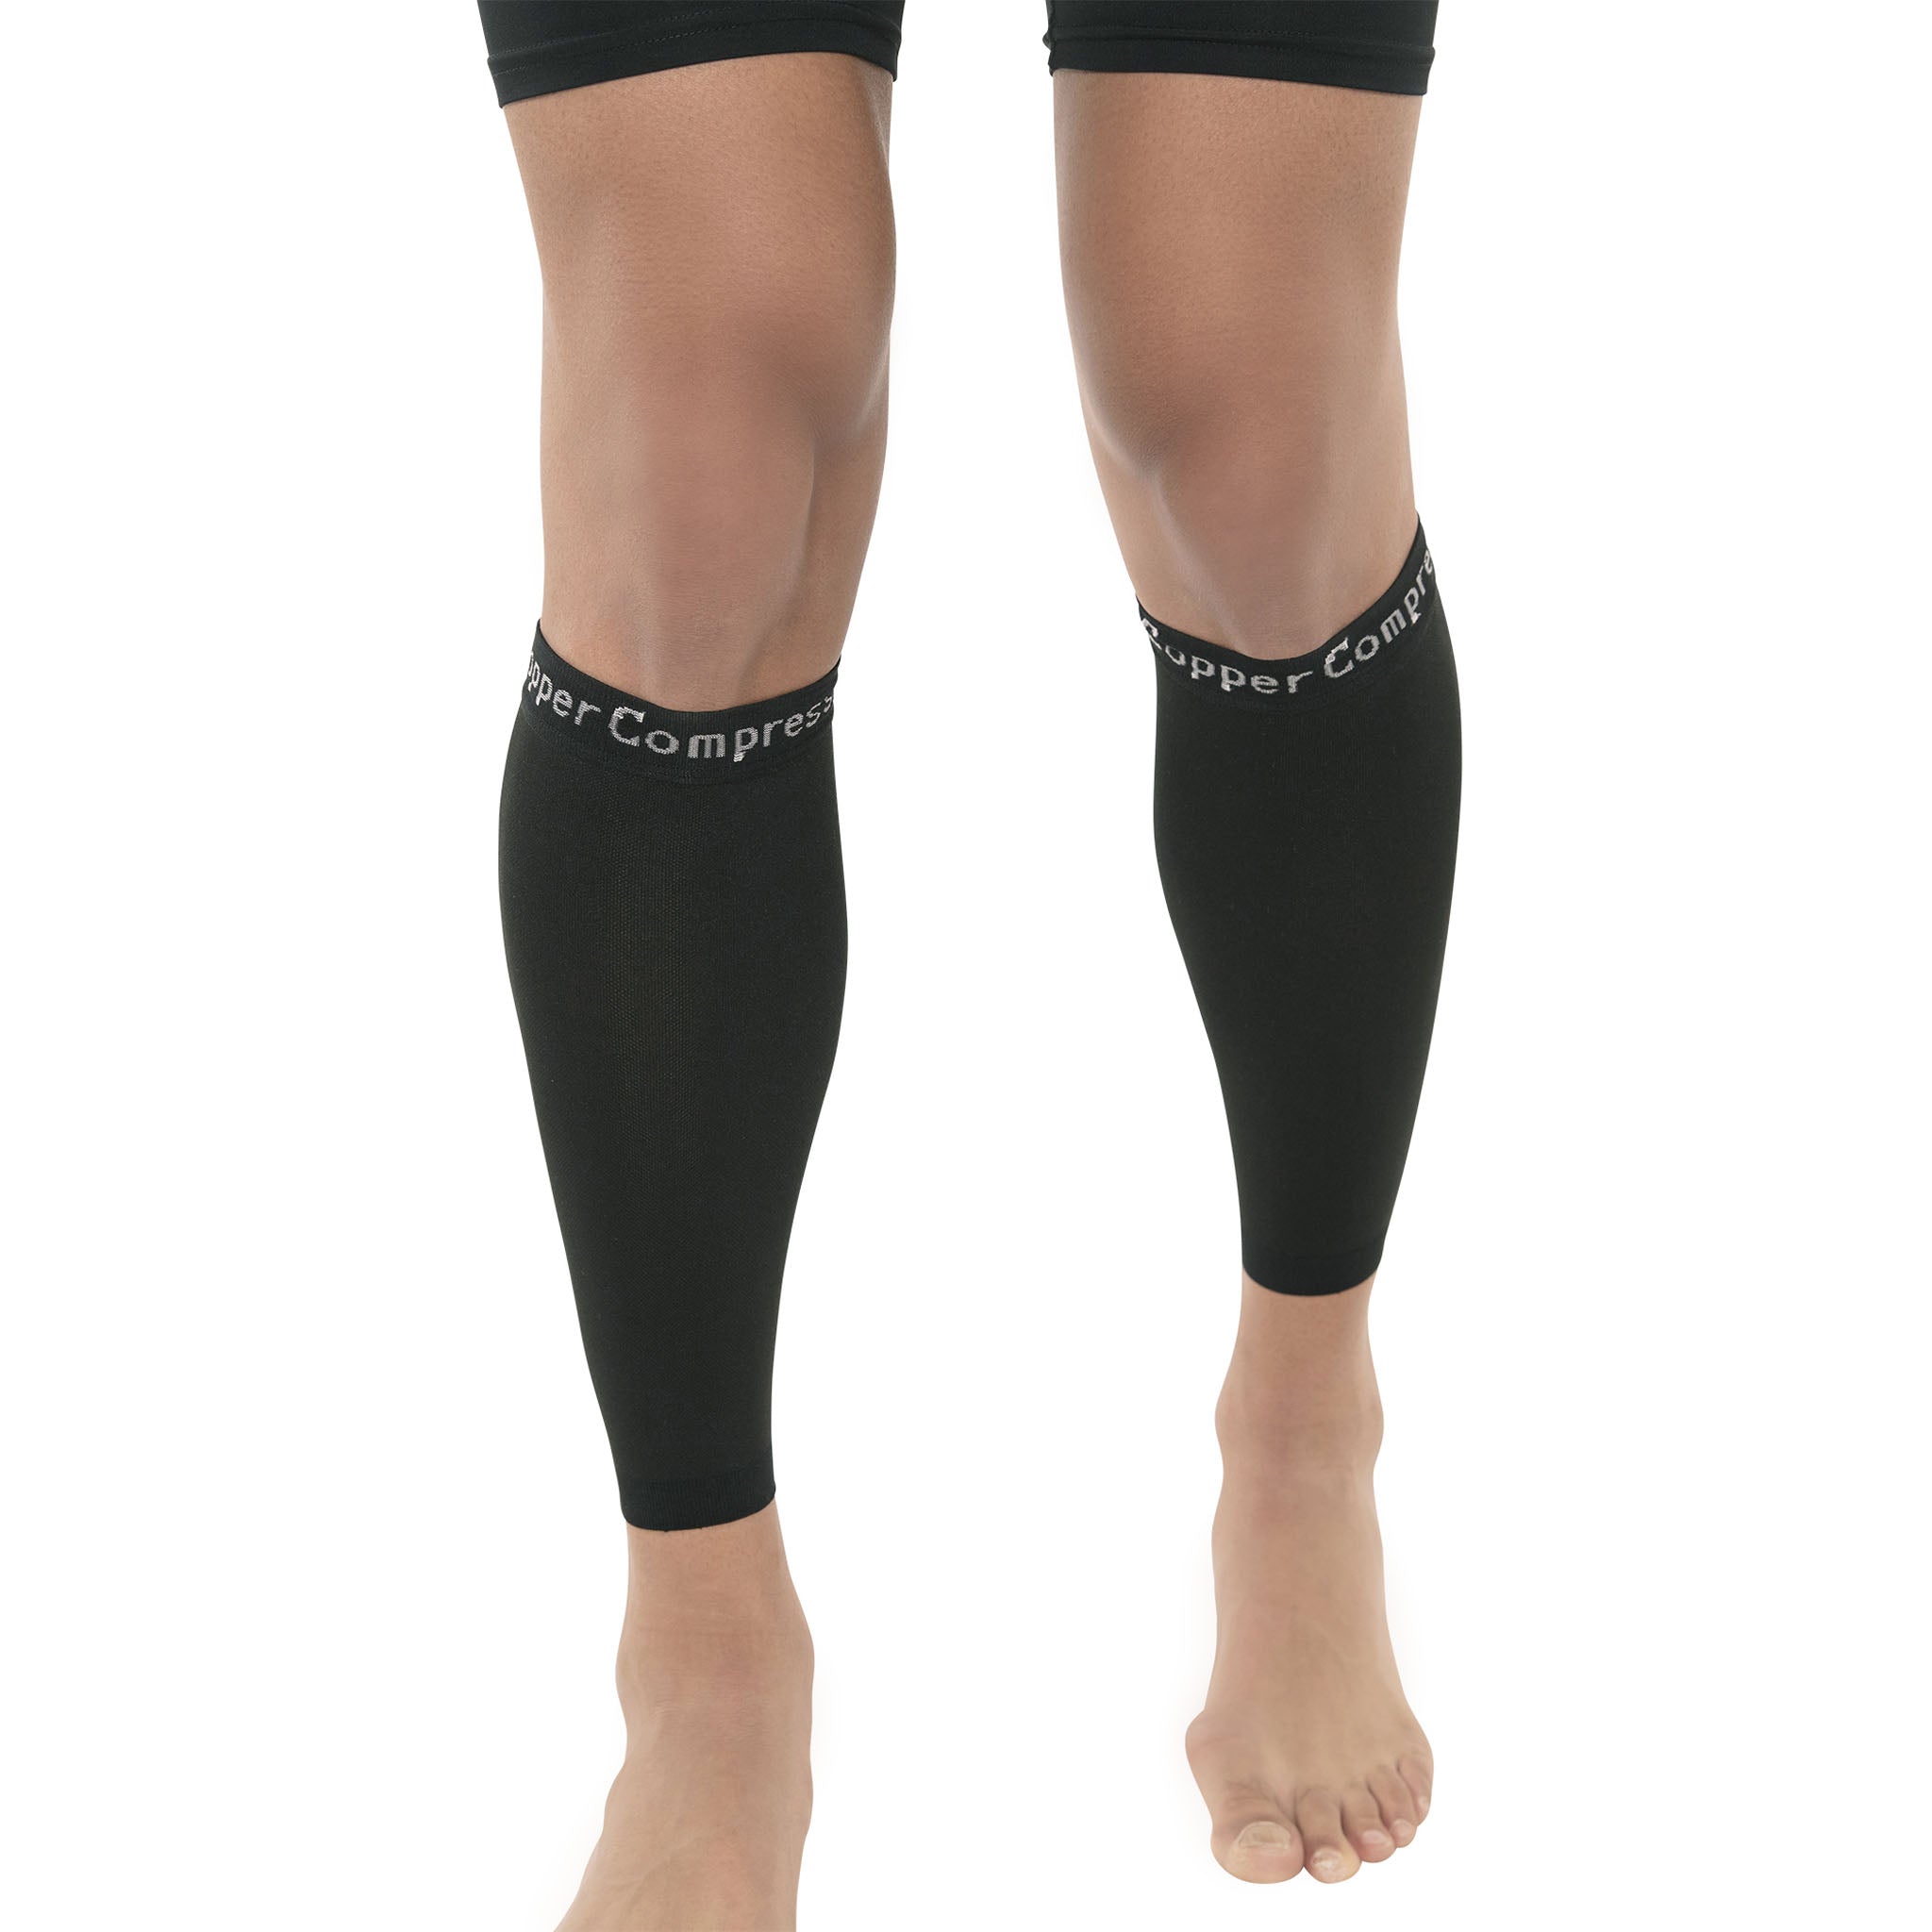  CopperJoint Calf Compression Sleeves for Men & Women - Leg  Sleeve and Shin Splints Support - Ideal for Leg Cramp Relief, Varicose Veins,  Running - 20-30mmHg Copper Infused Nylon Small 